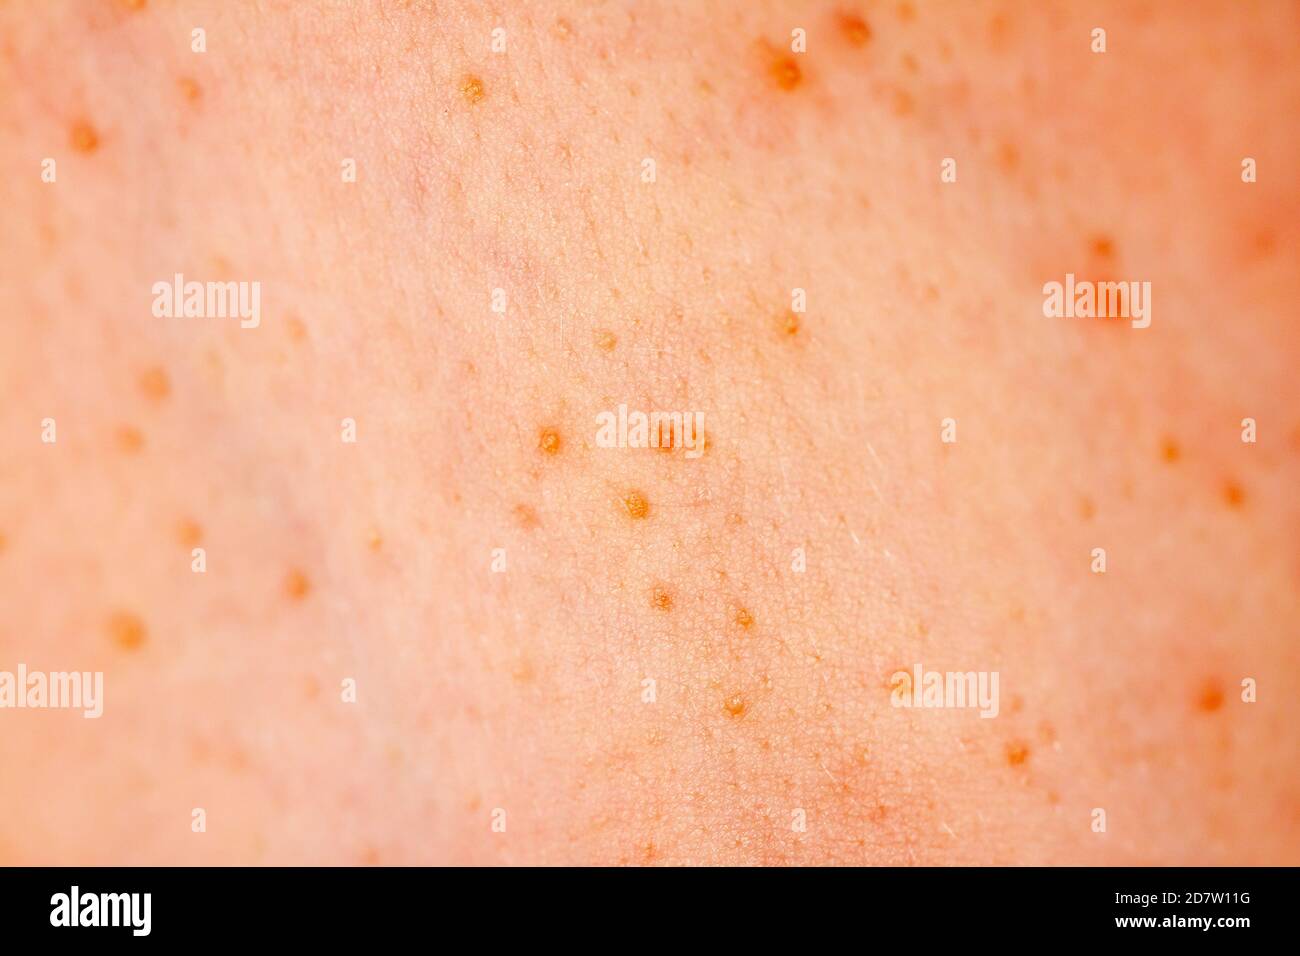 Close up image of a little boy's body suffering severe urticaria, nettle rash also called hives. Stock Photo